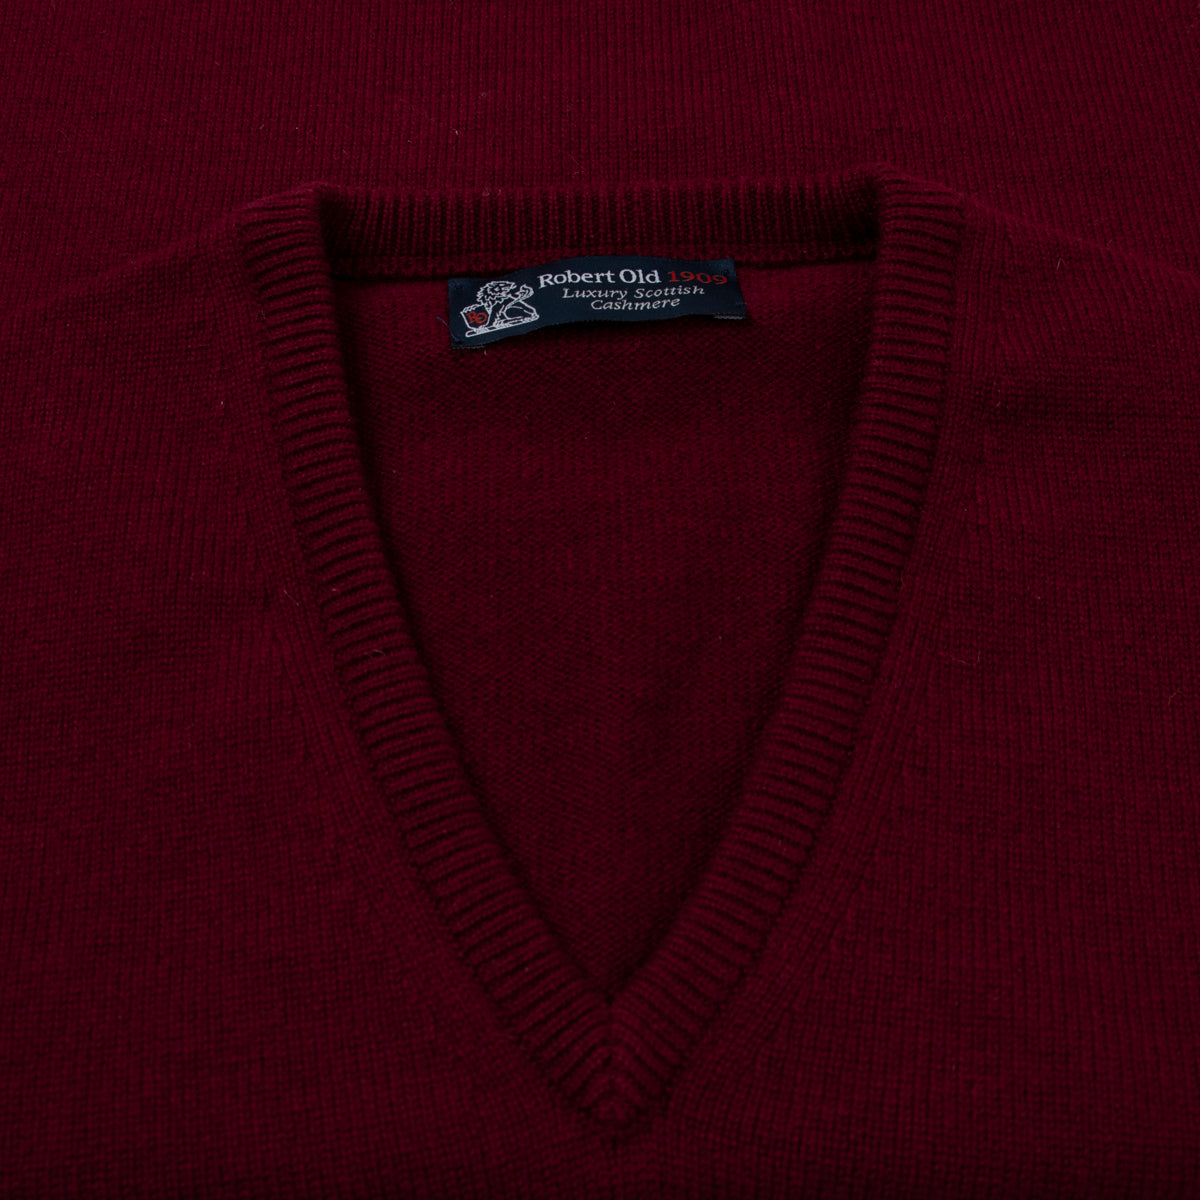 Claret Red Tobermorey 4ply V-Neck Cashmere Sweater  Robert Old   